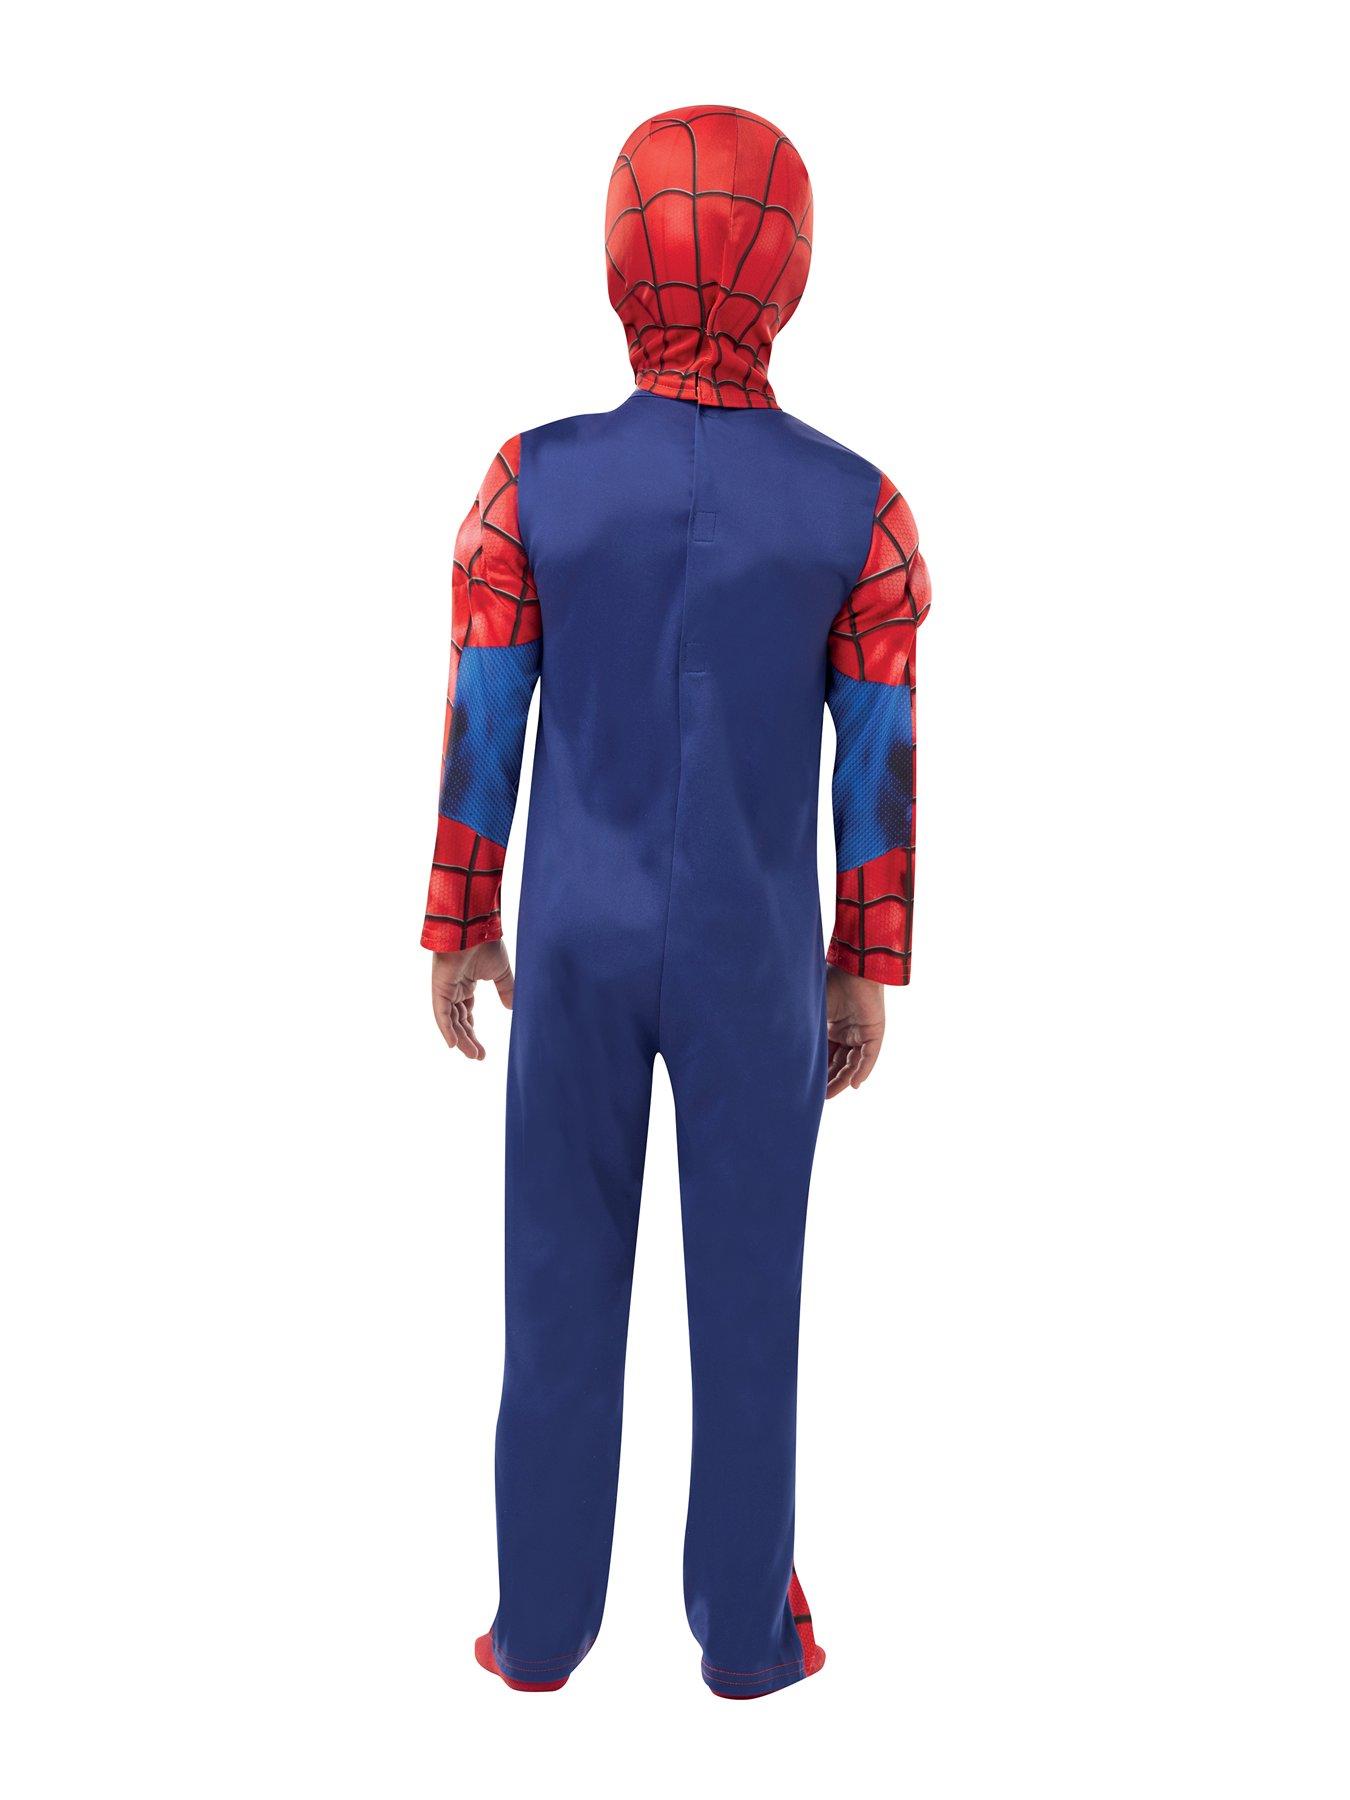 Spider-Man Child Costume Sz 7-8 Muscle Chest Jumpsuit W/boot